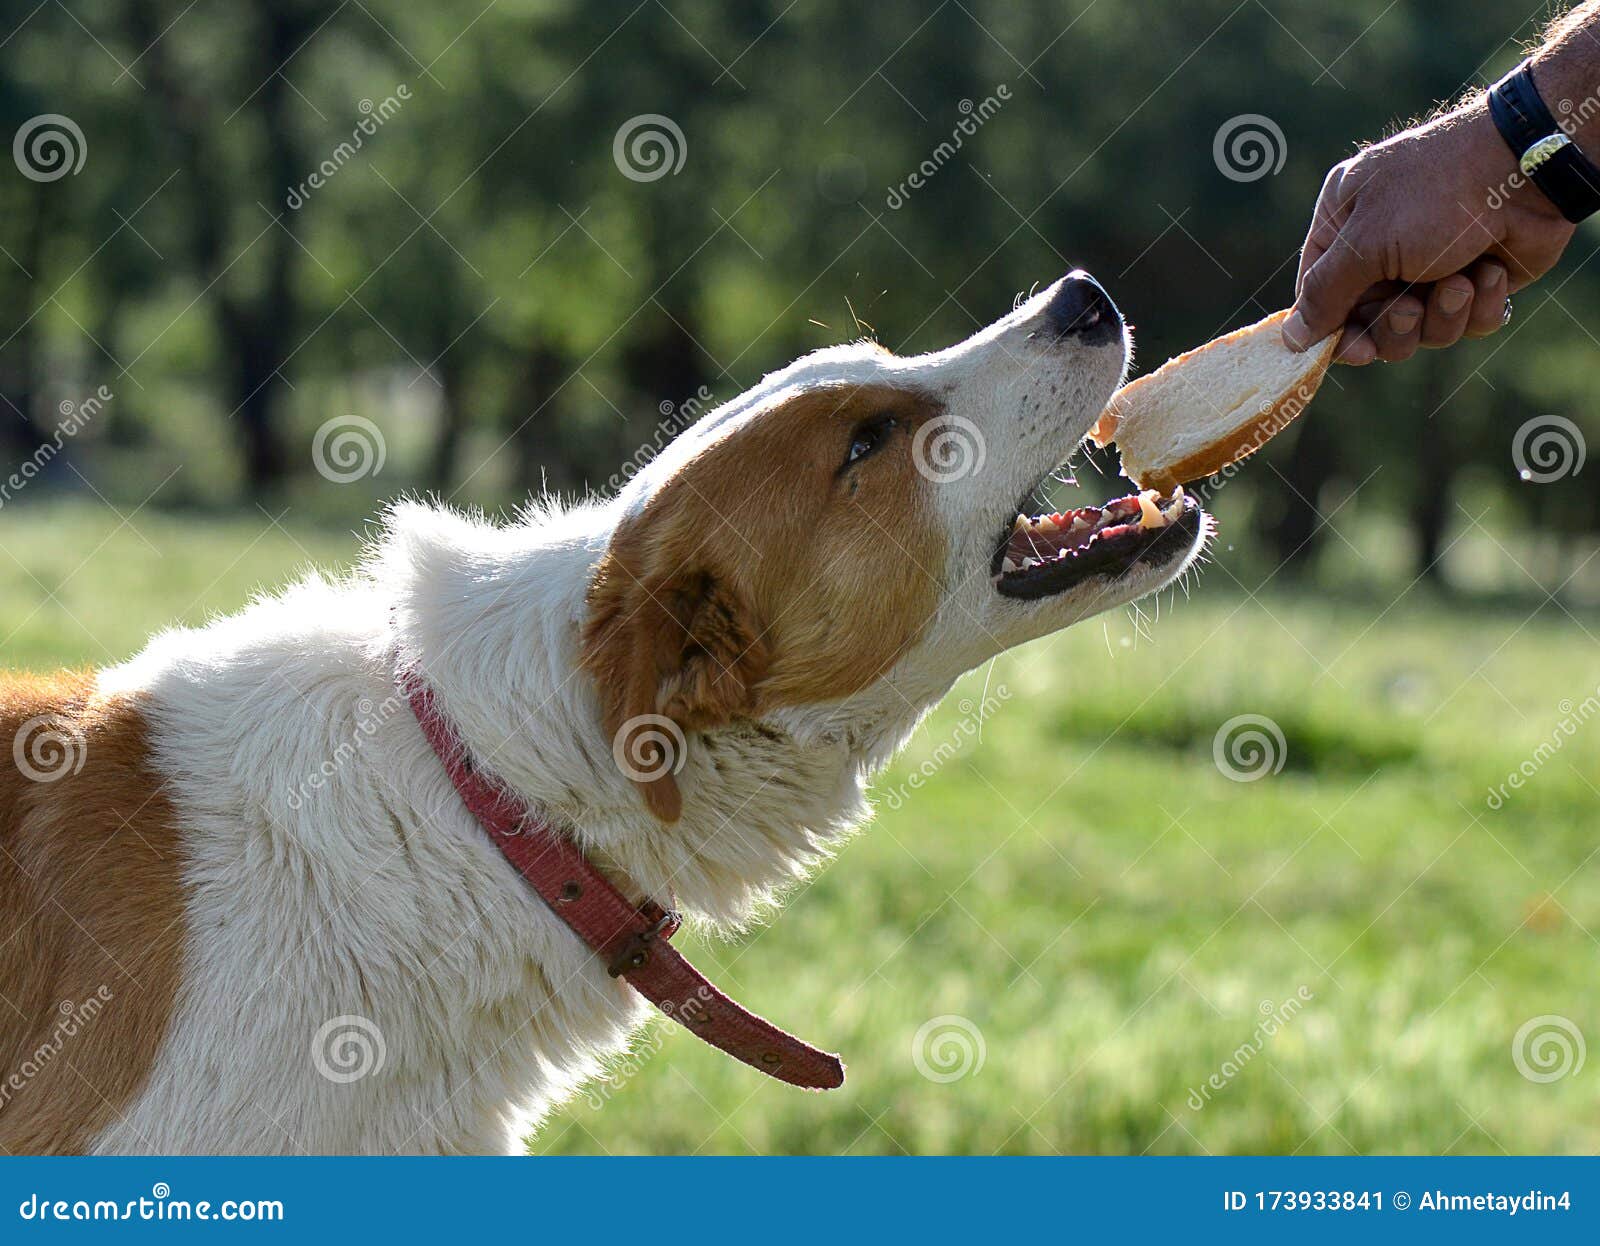 a dog eats bread from the owner hands